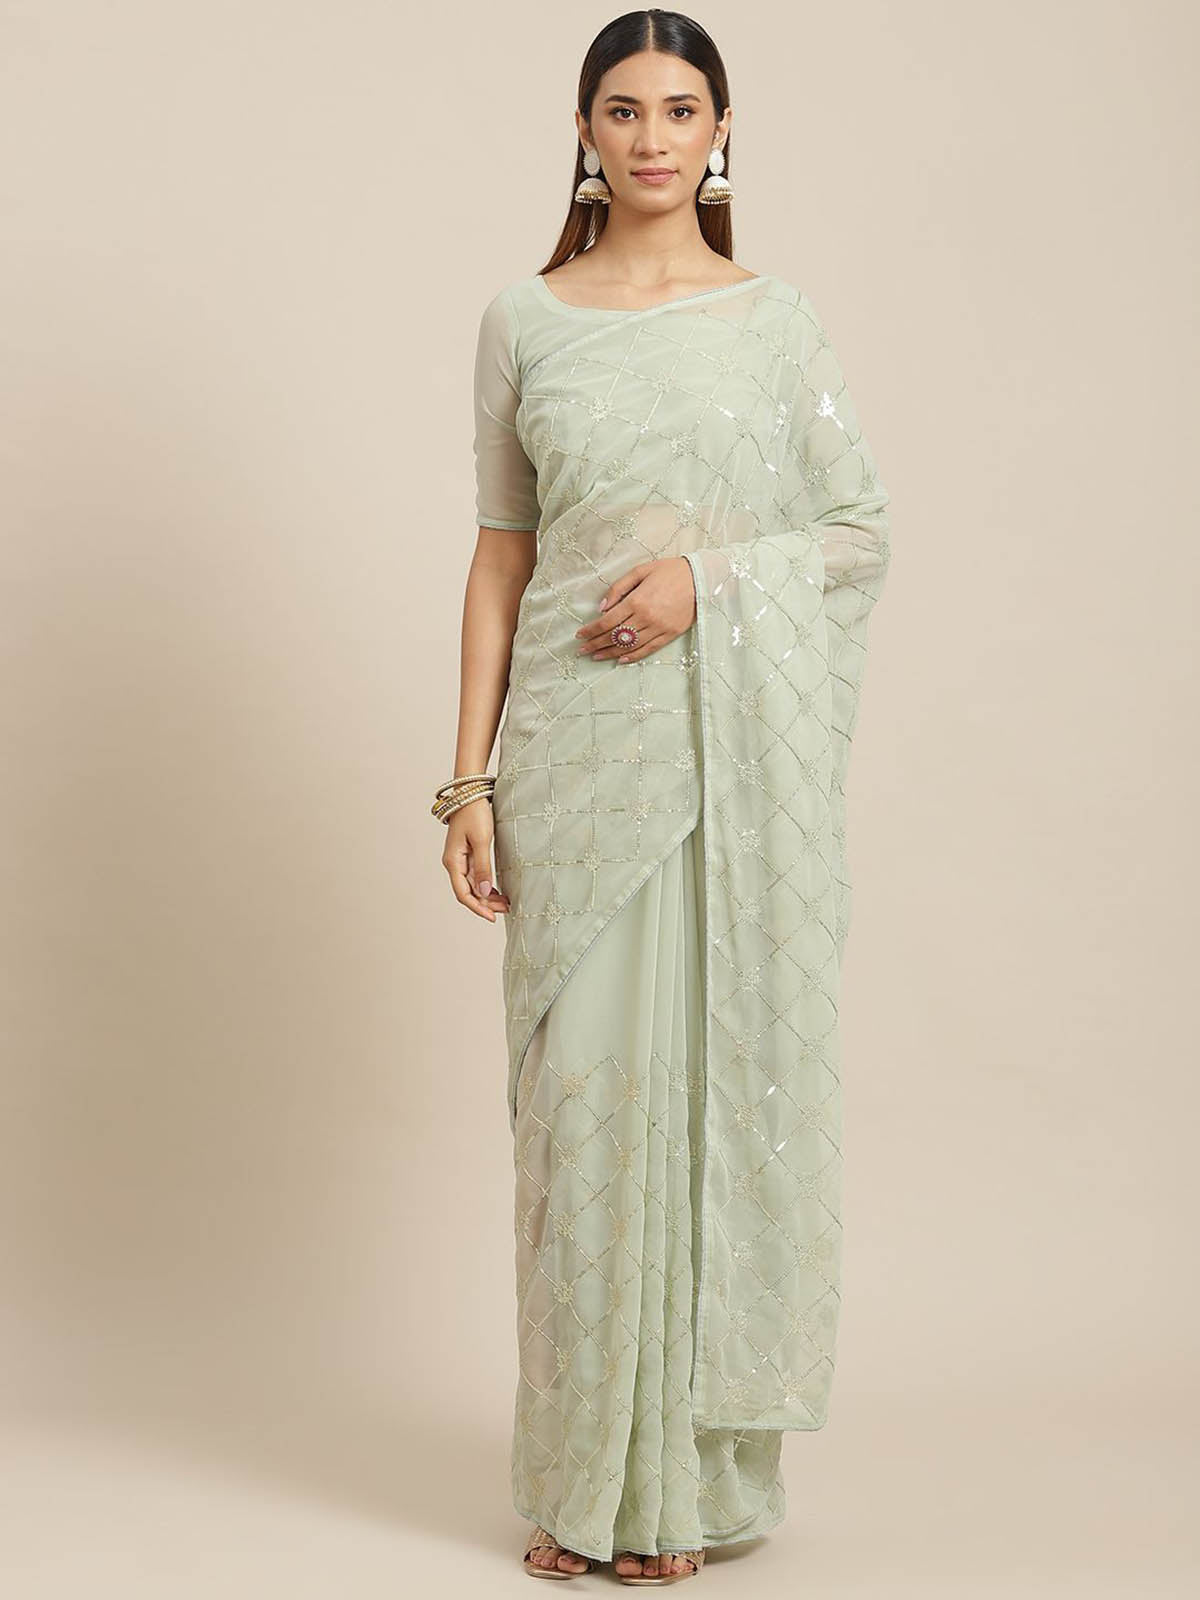 Women's Light Green Georgette Embroidered Saree With Blouse - Odette